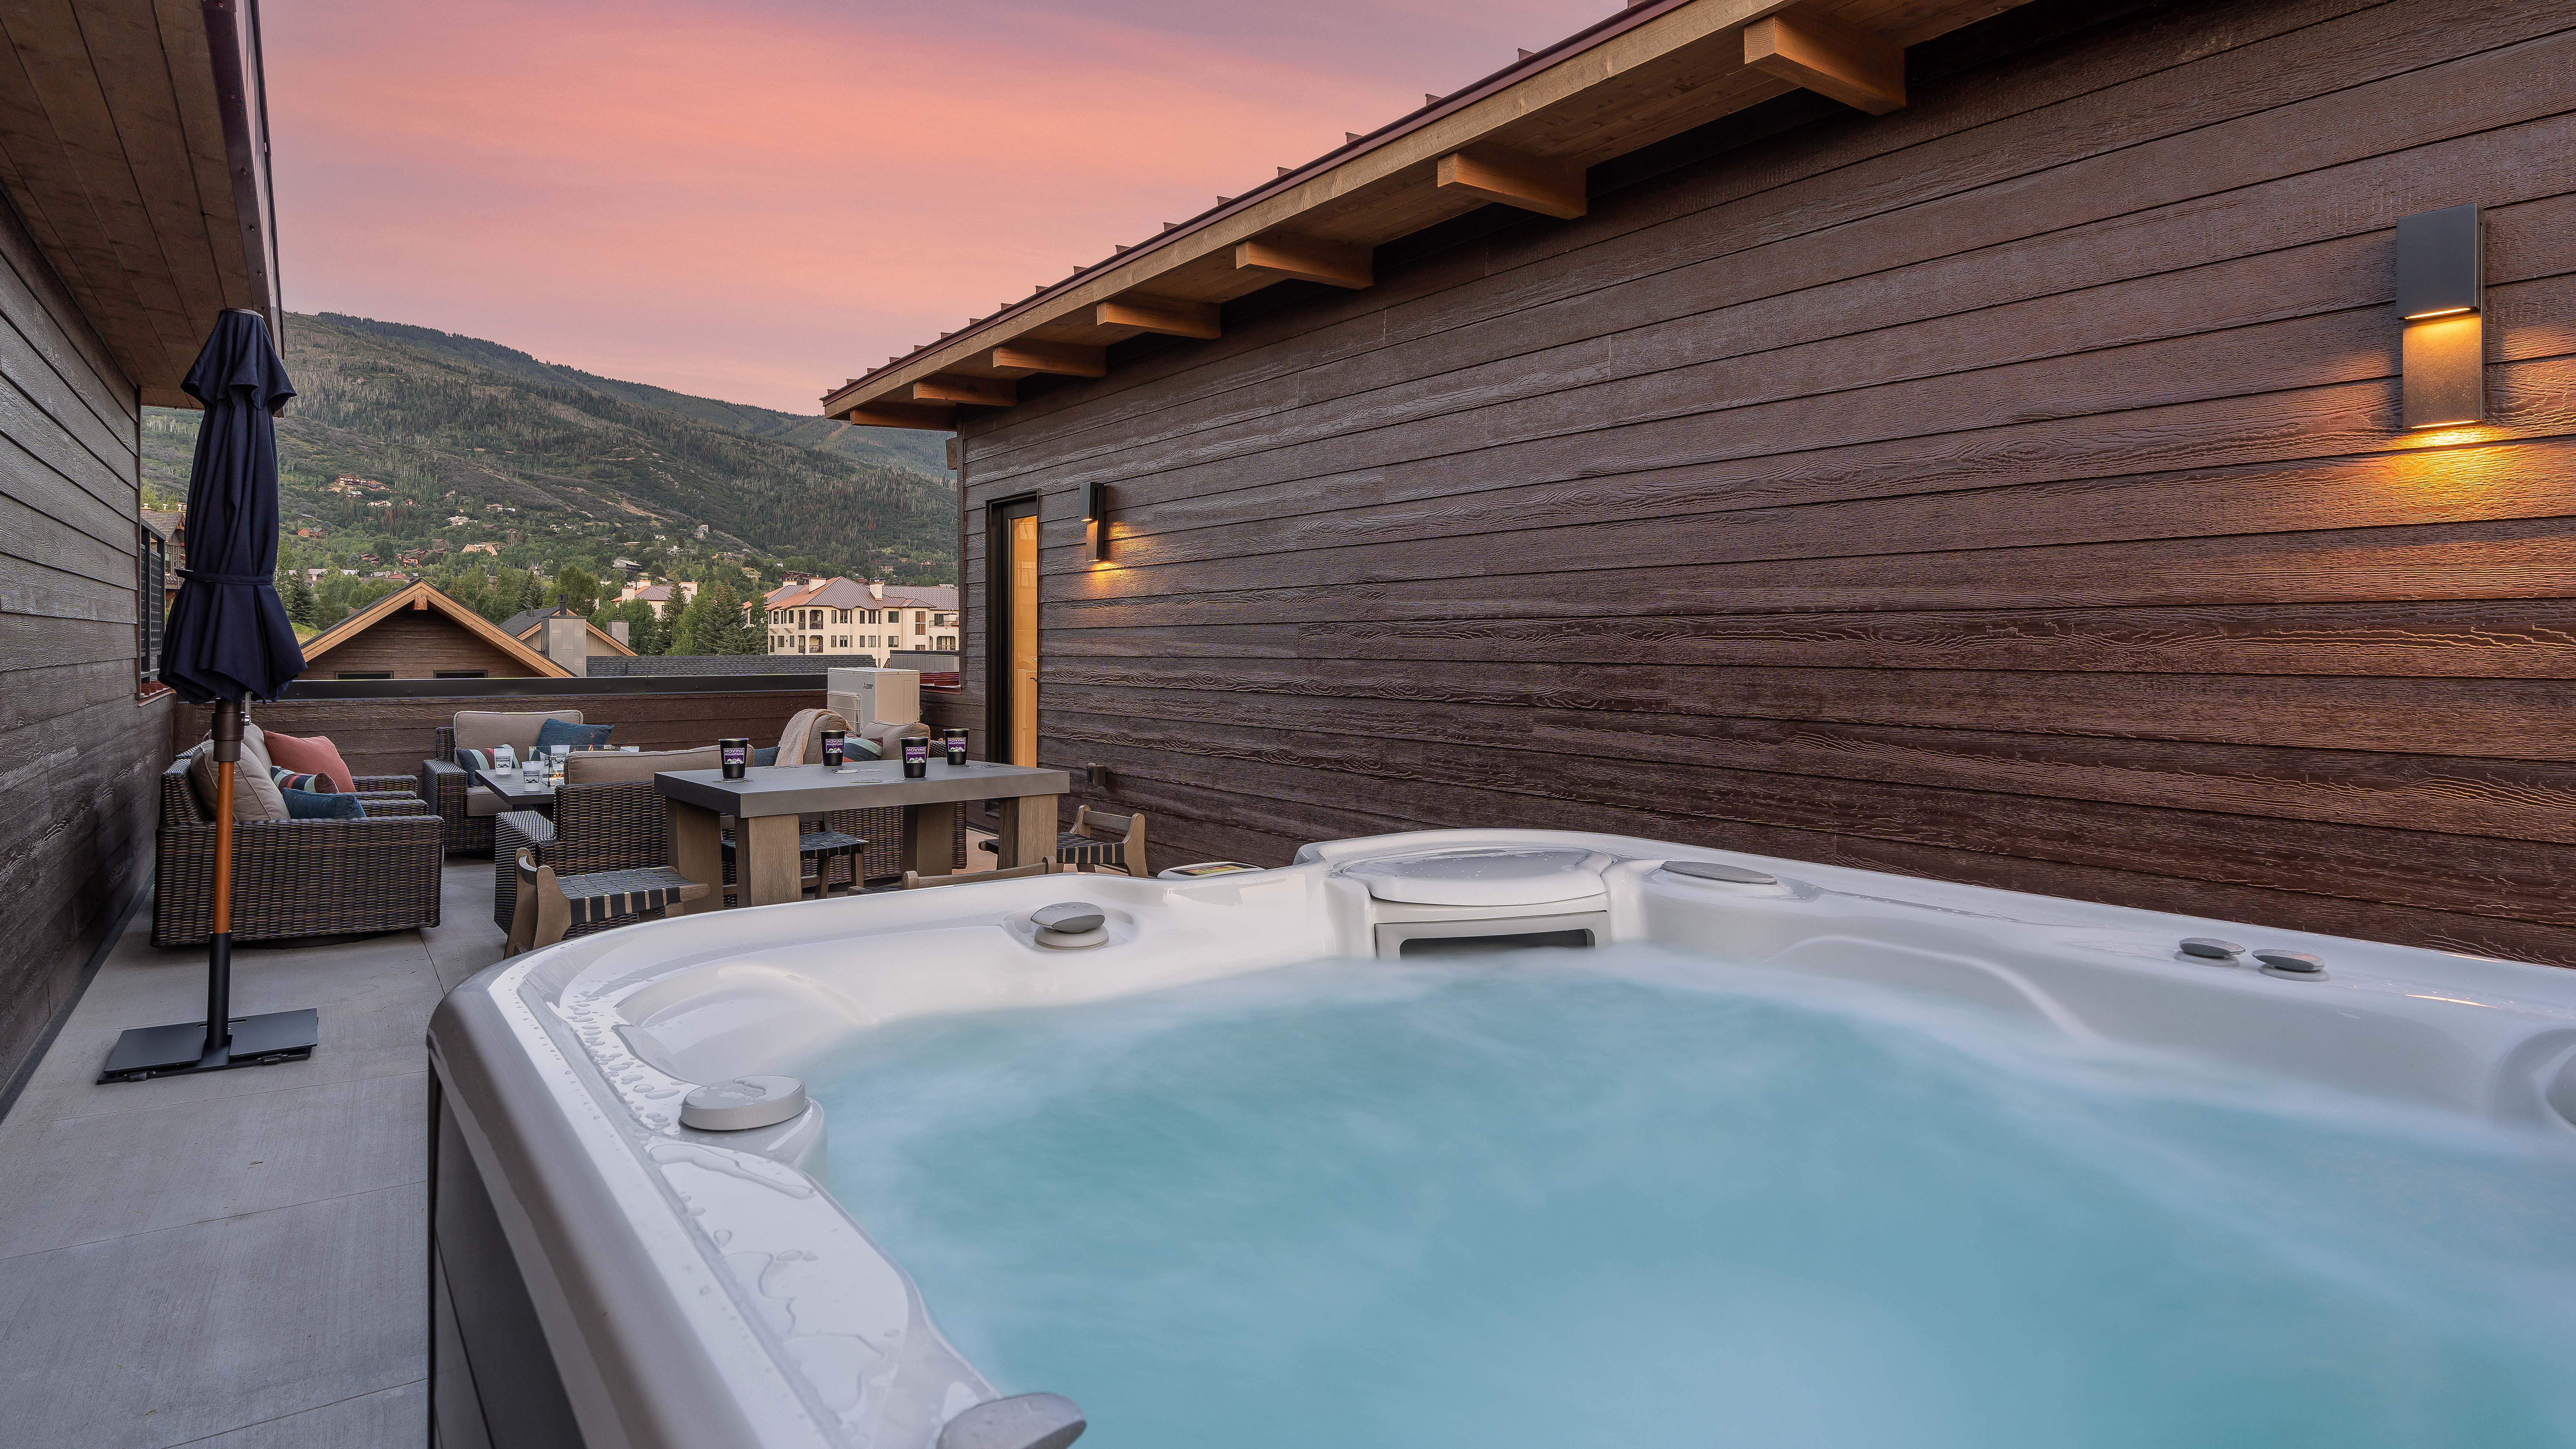 Rooftop patio private hot tub with views of Steamboat Ski Resort